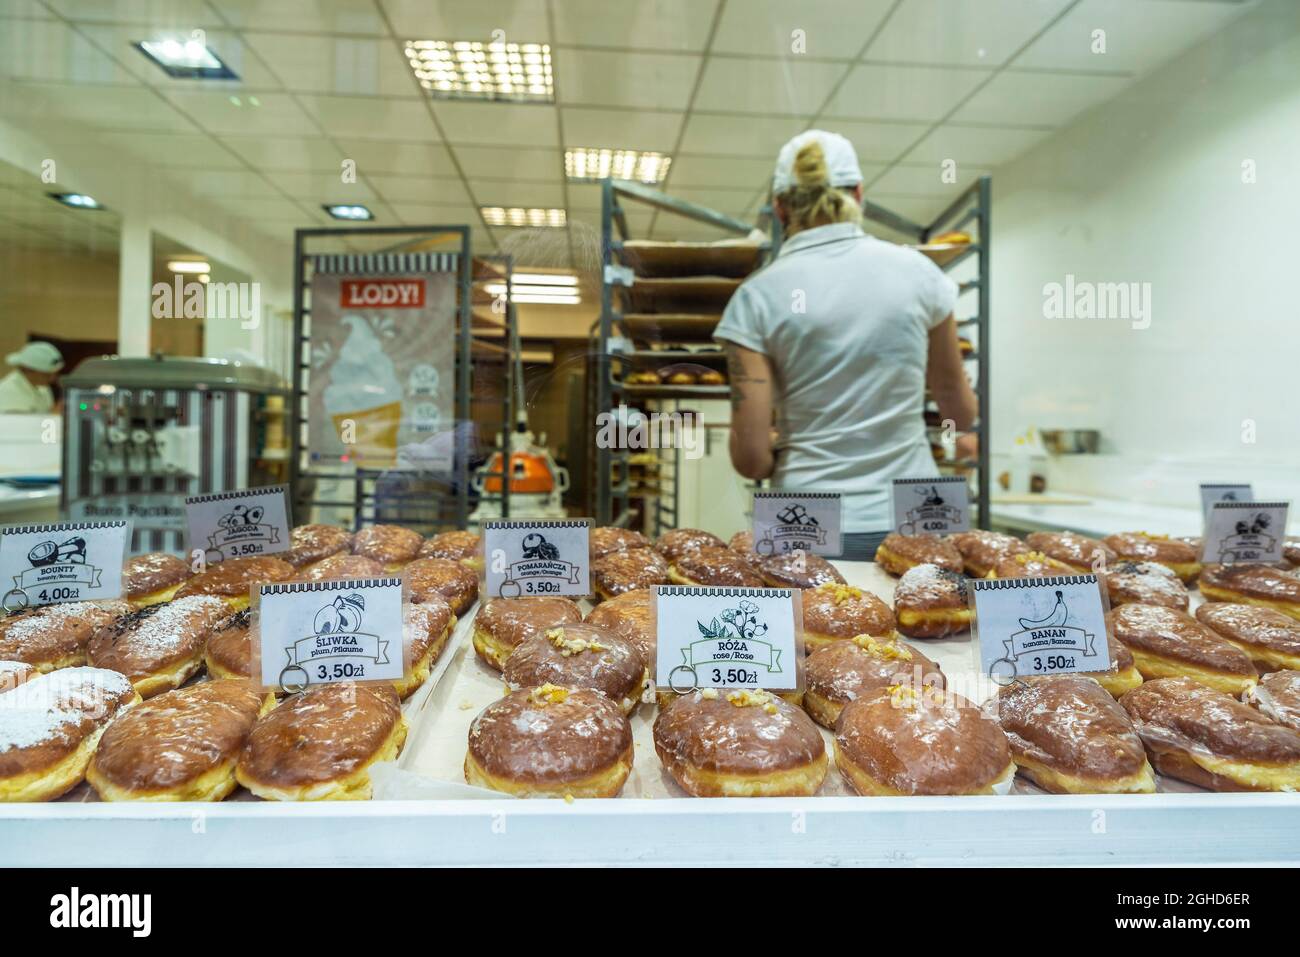 Krakow, Poland - August 28, 2018: Vendor with an assortment of traditional Paczki in a pastry shop in the historical center of Krakow, Poland Stock Photo